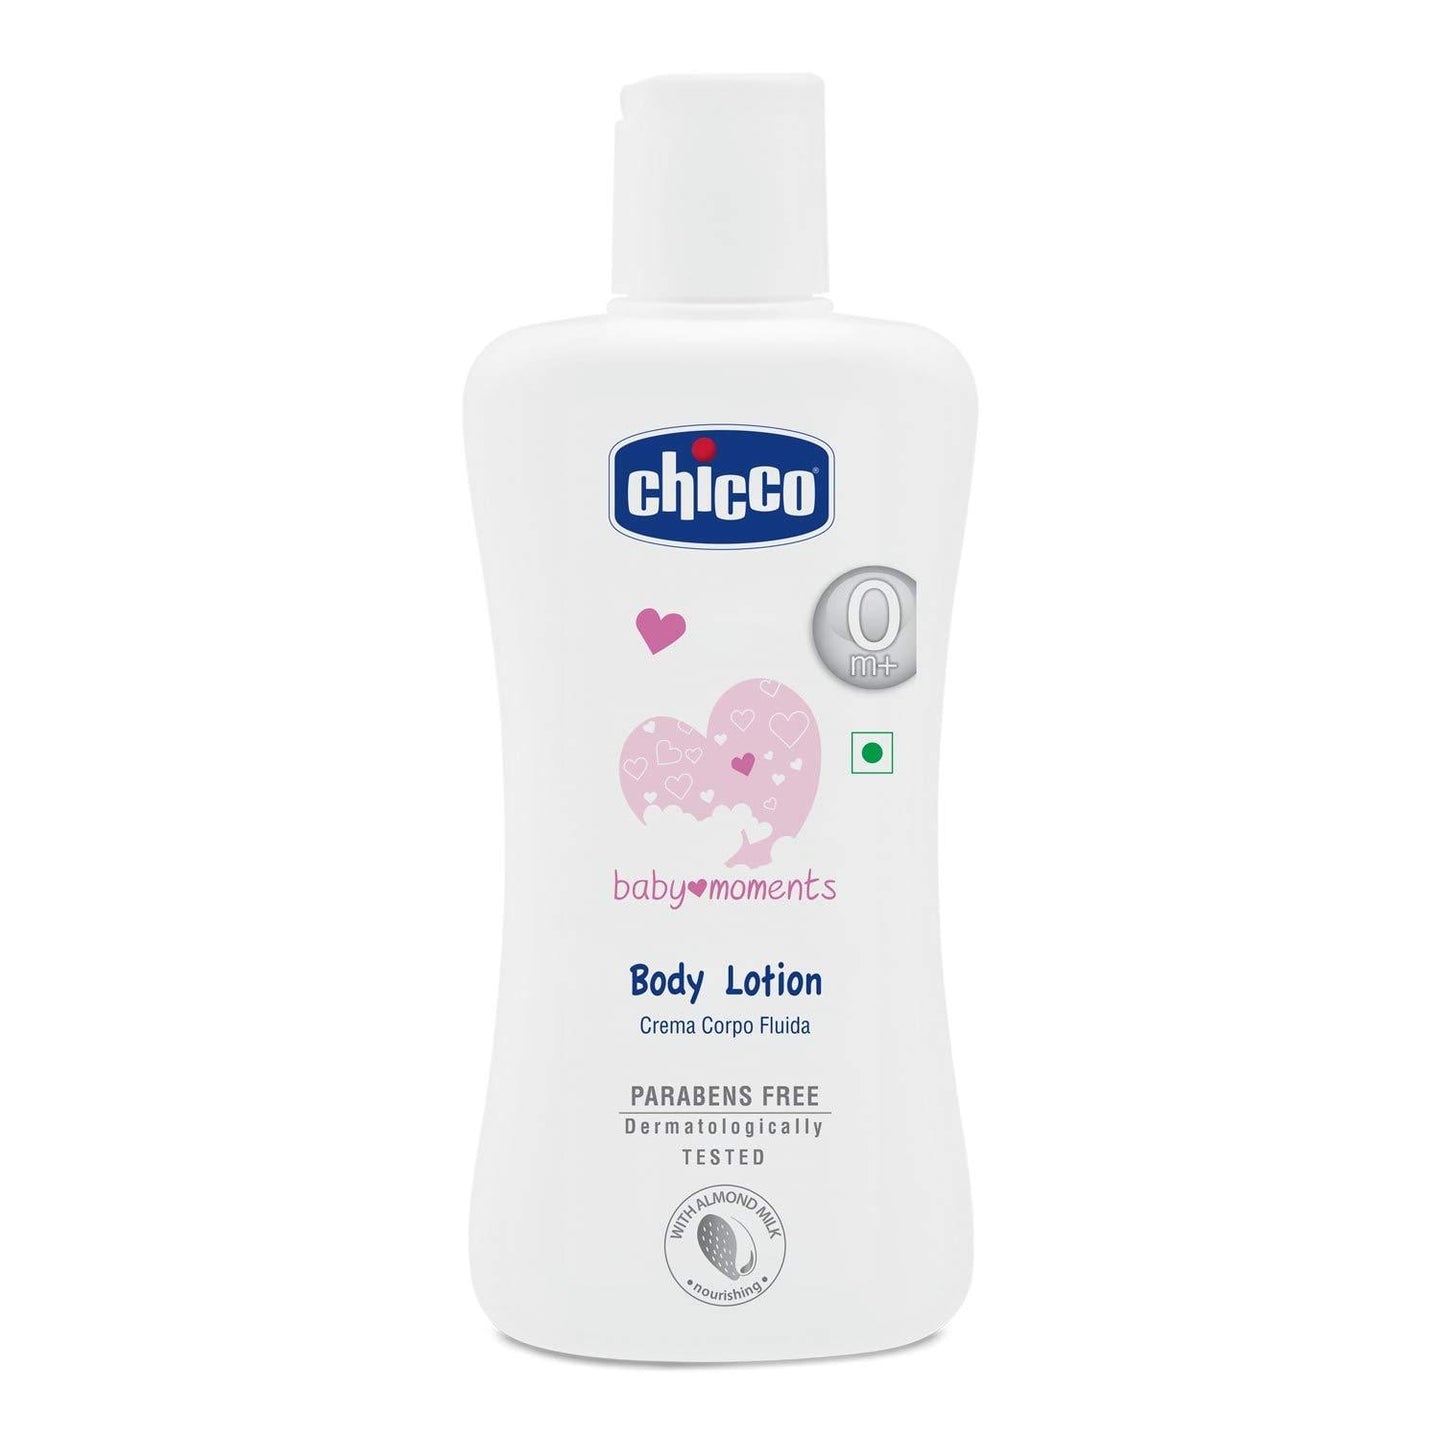 Chicco Baby Moments Body Lotion